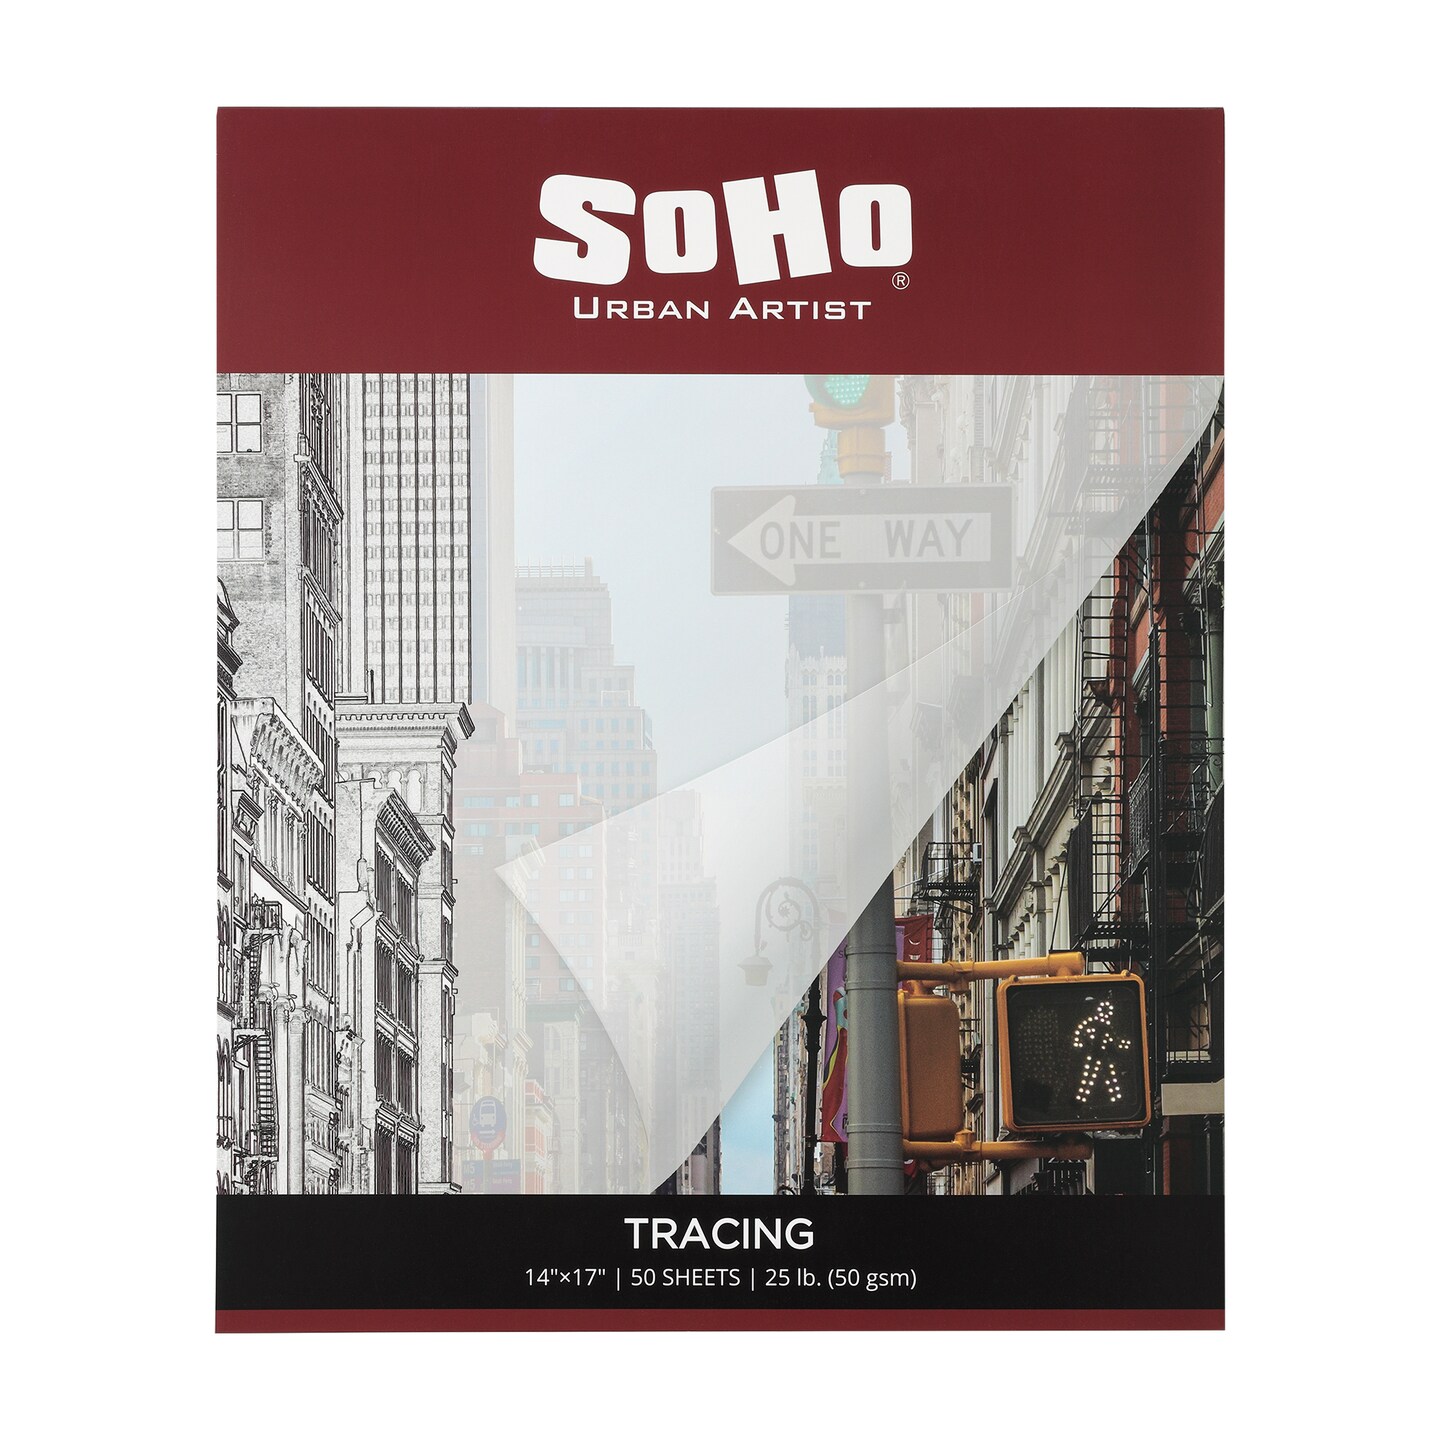 SoHo Urban Artist Vellum Tracing Paper Pads - Translucent Vellum Paper for Drawing, Tracing, Different Media Types, &#x26; More